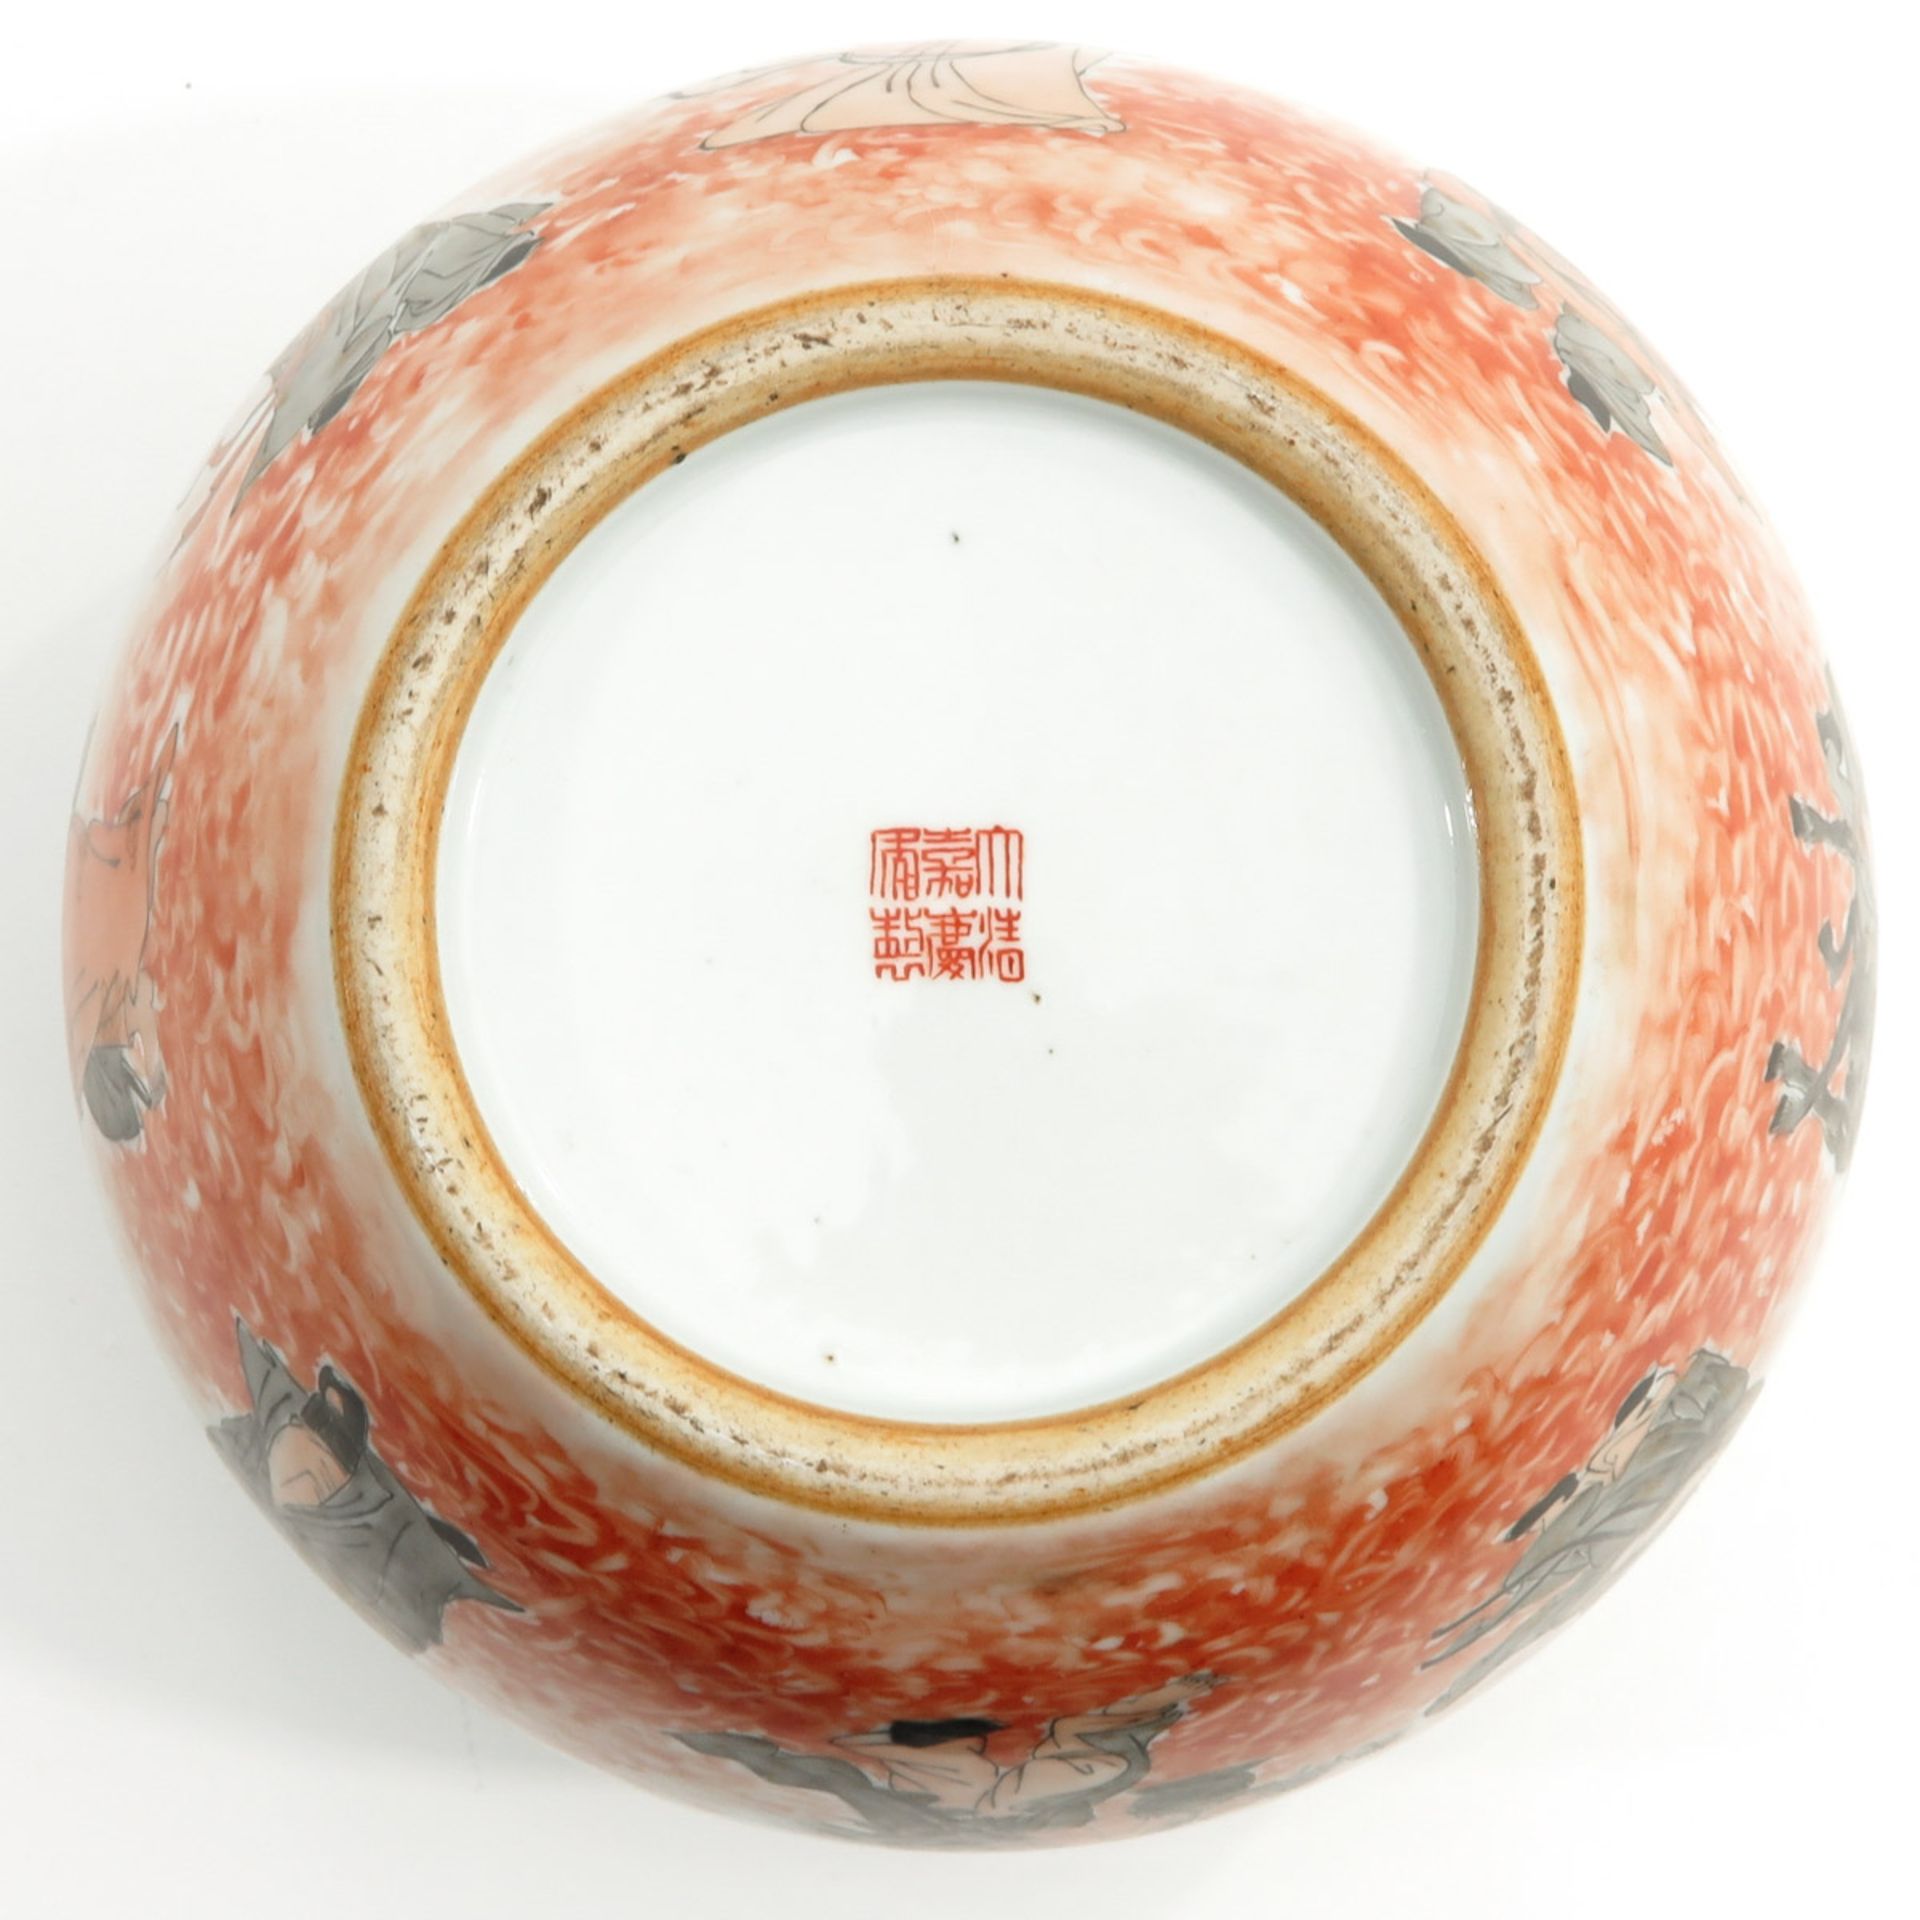 A Polyhchrome Decor Fish Bowl - Image 6 of 10